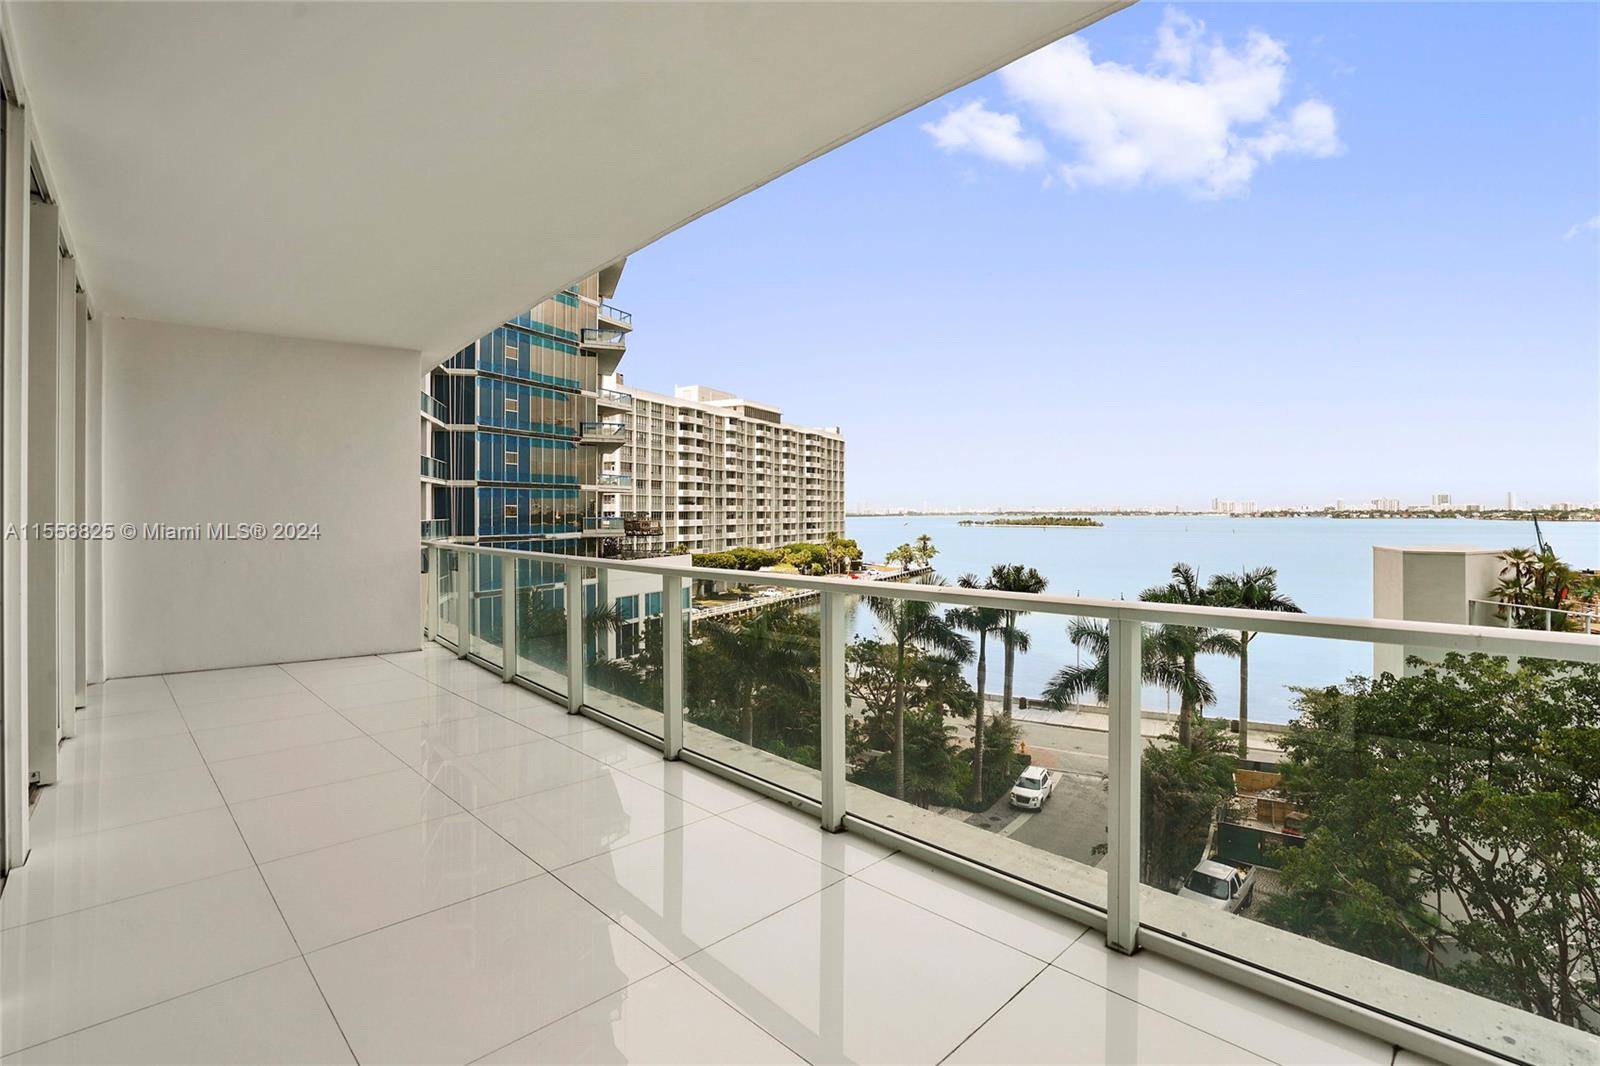 SPECTACULAR UNIT WITH DIRECT BAY VIEWS OF BISCAYNE BAY.